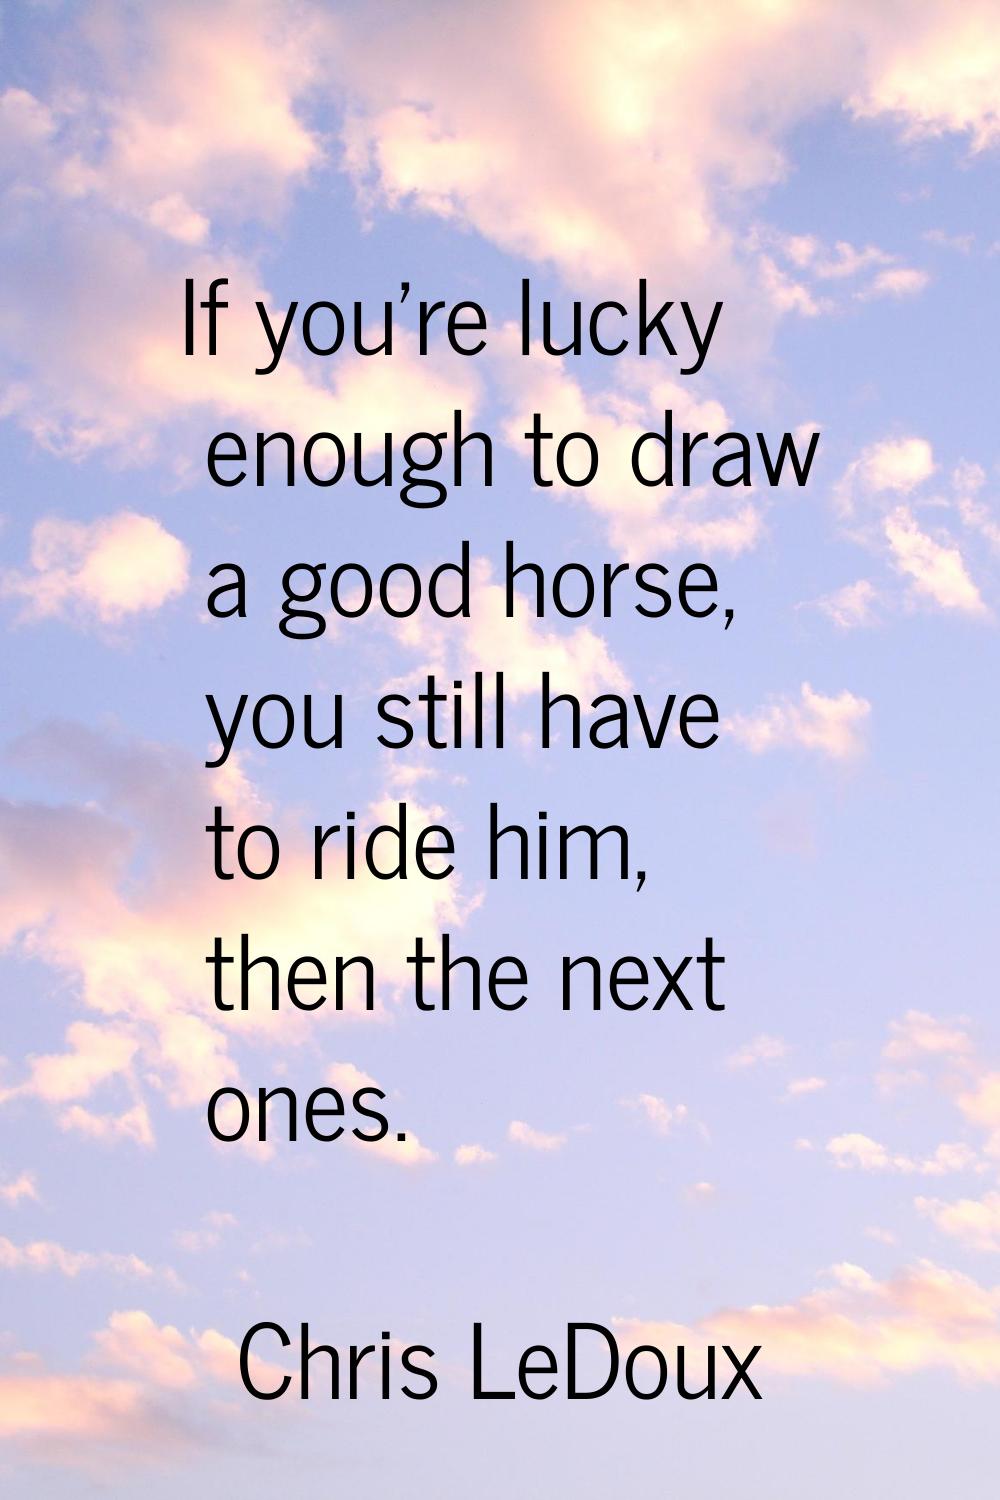 If you're lucky enough to draw a good horse, you still have to ride him, then the next ones.